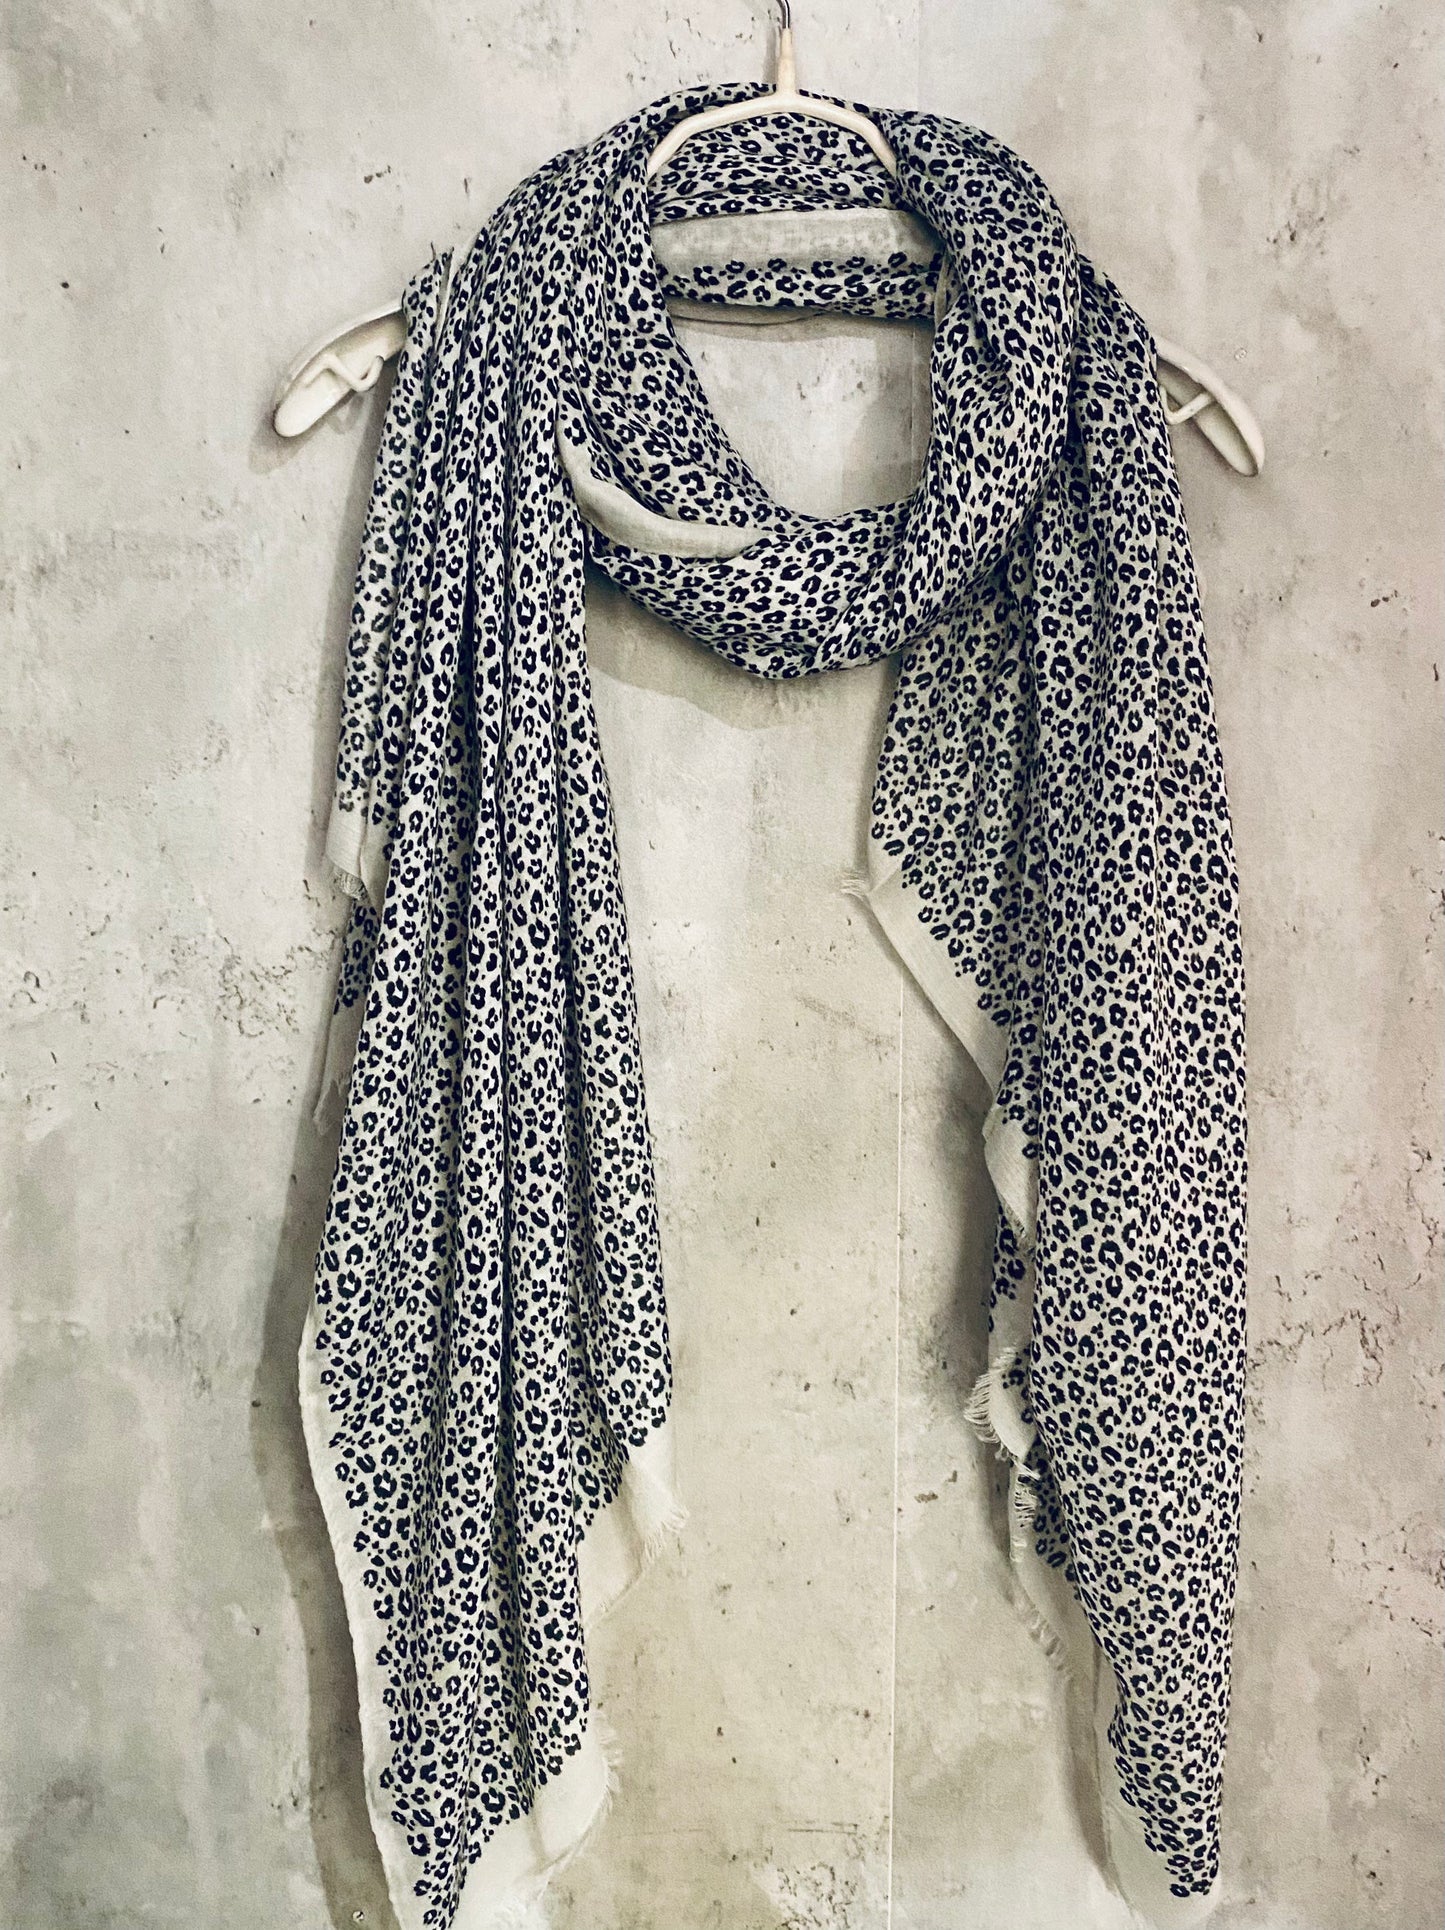 Small leopard Pattern Grey Cotton Scarf/Spring Summer Autumn Scarf/UK Seller/Scarf Women/Gifts For Mom/Gifts For Her Birthday/Christmas